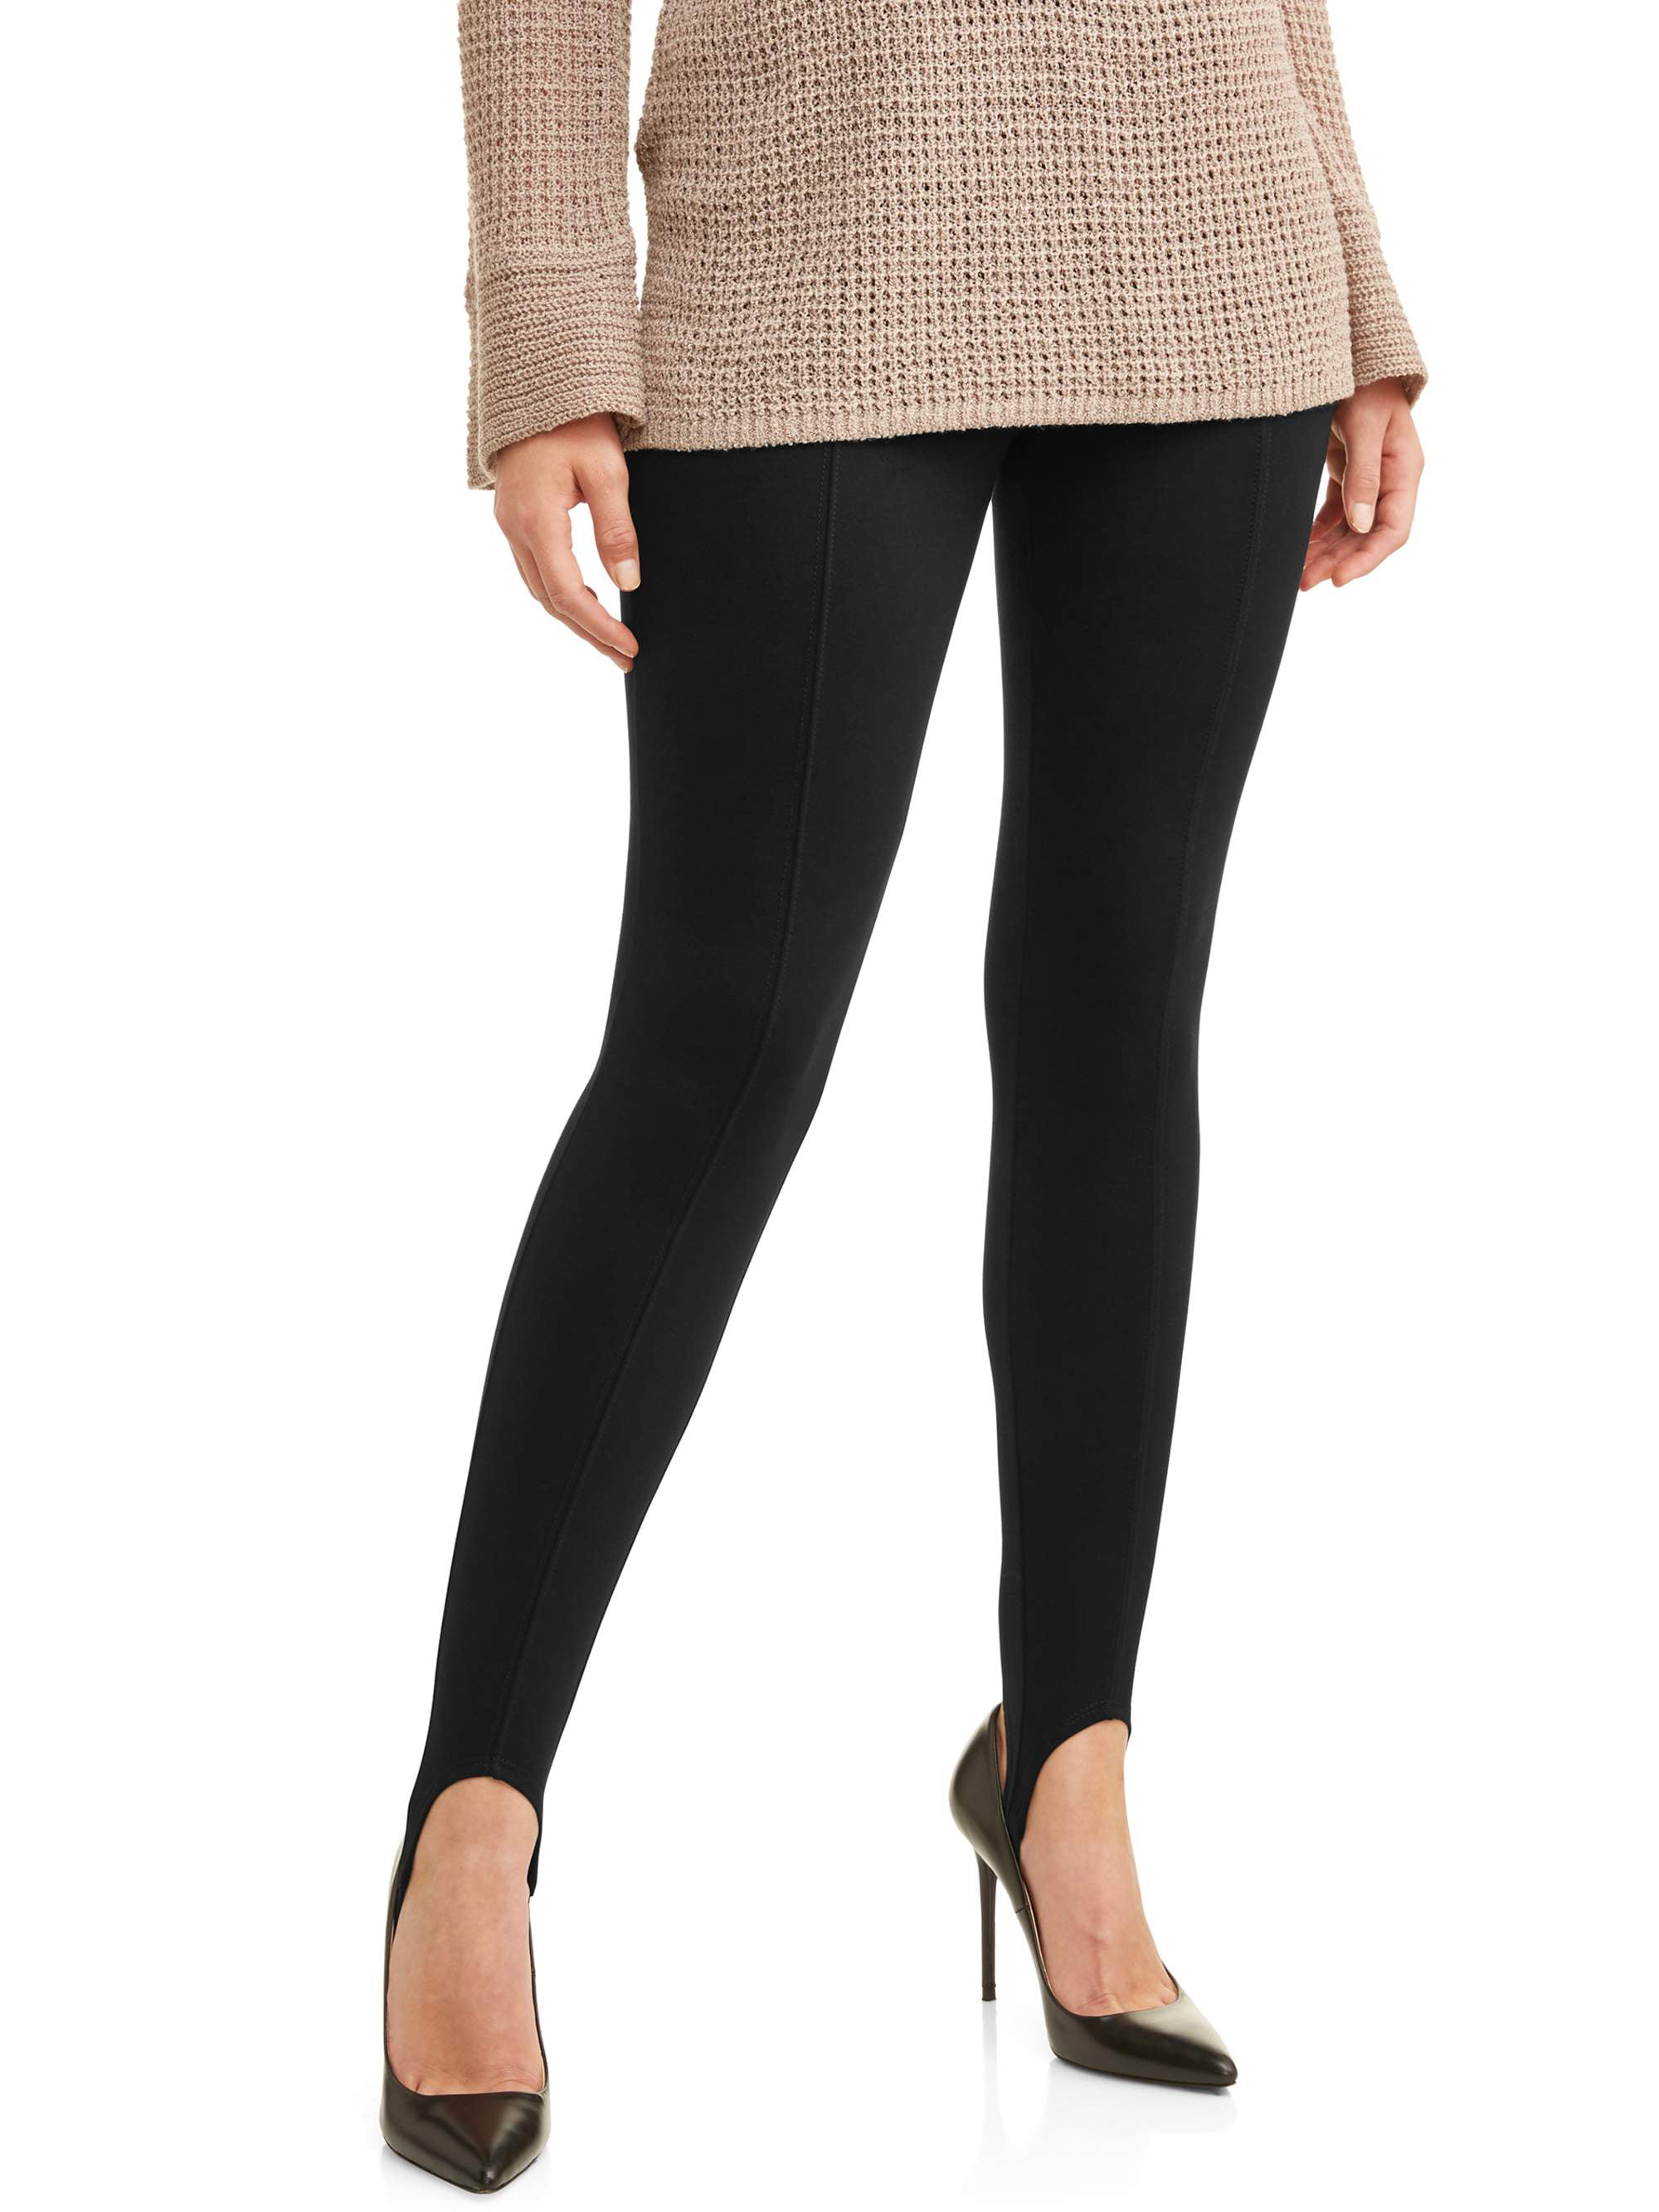 Leggings With Stirrups For Women  International Society of Precision  Agriculture